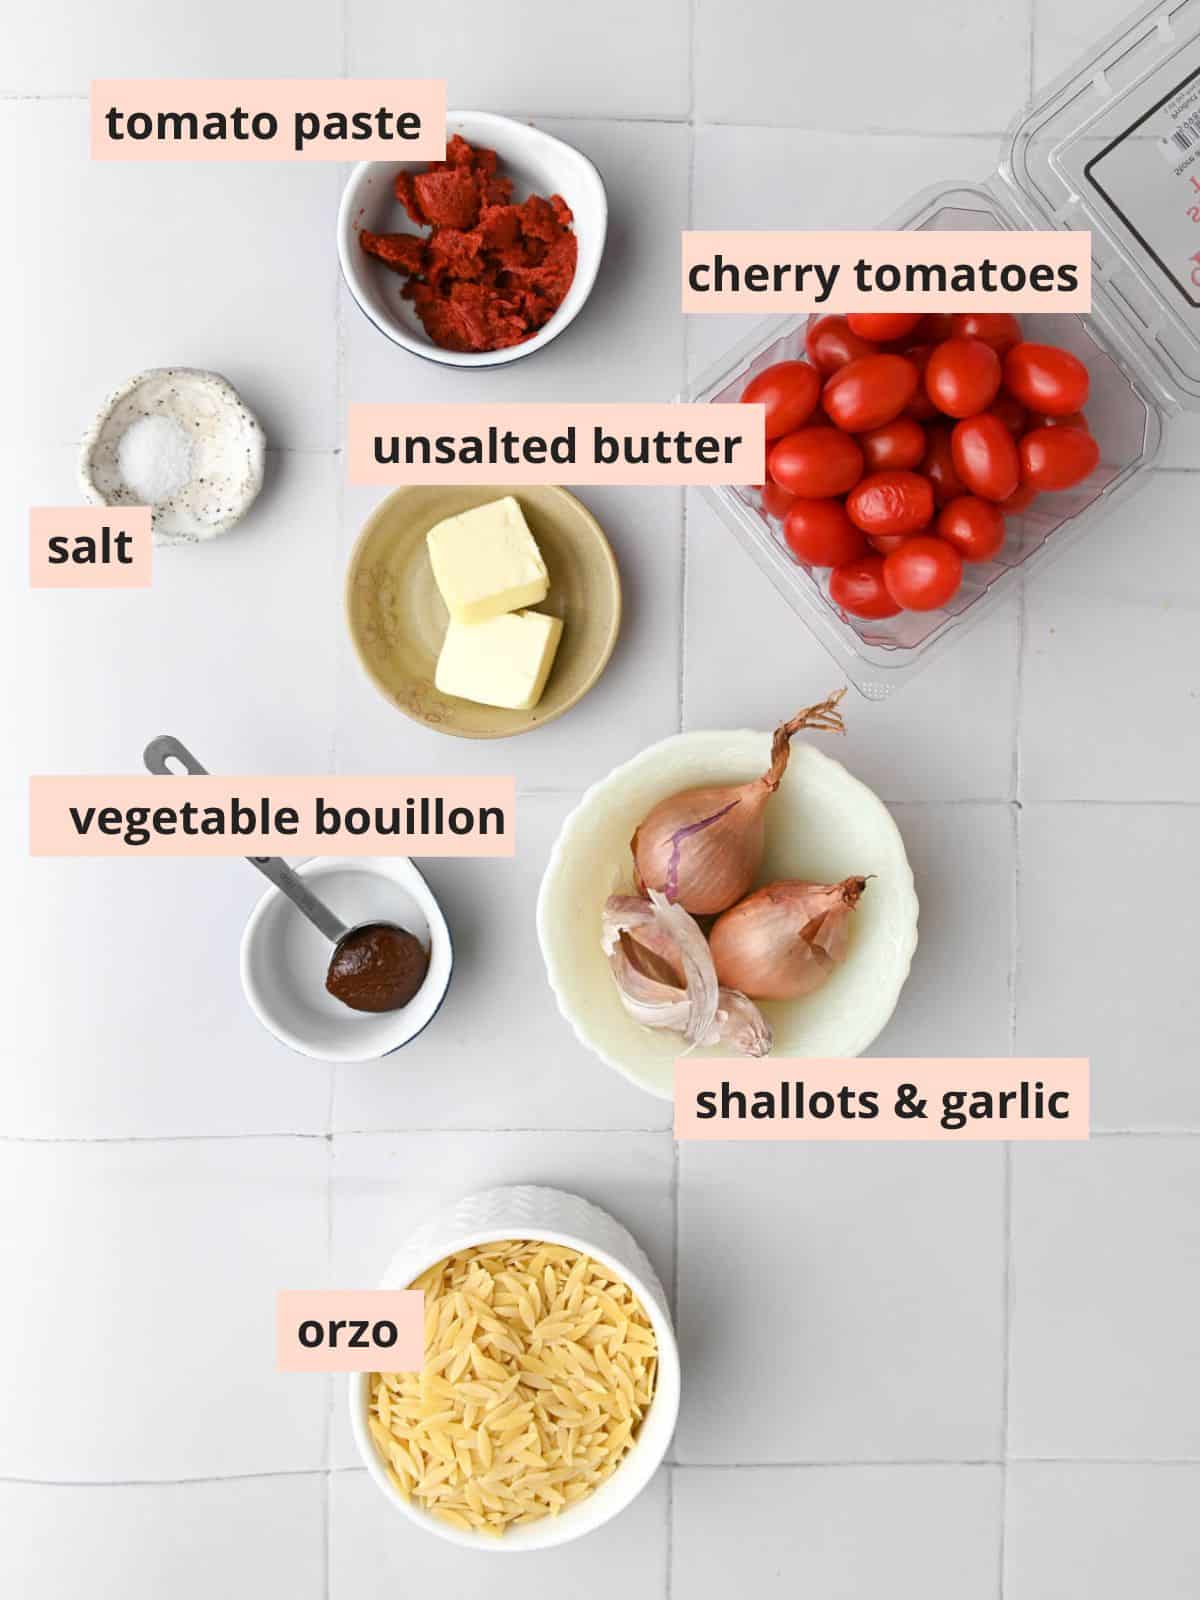 Labeled ingredients used to make cherry tomato orzo.